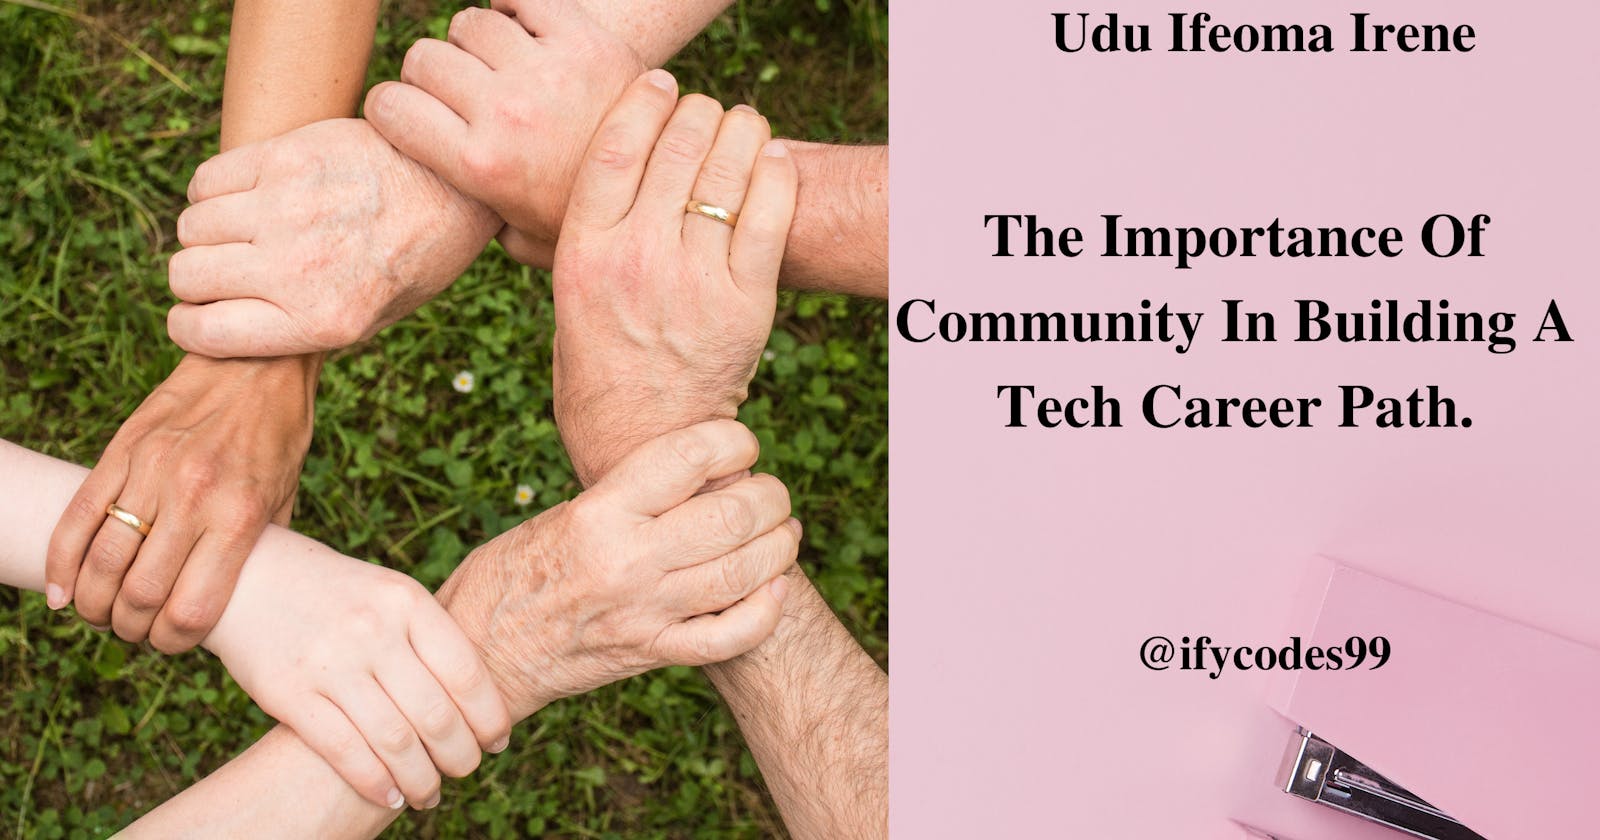 The Importance Of Community In Building A Tech Career Path.